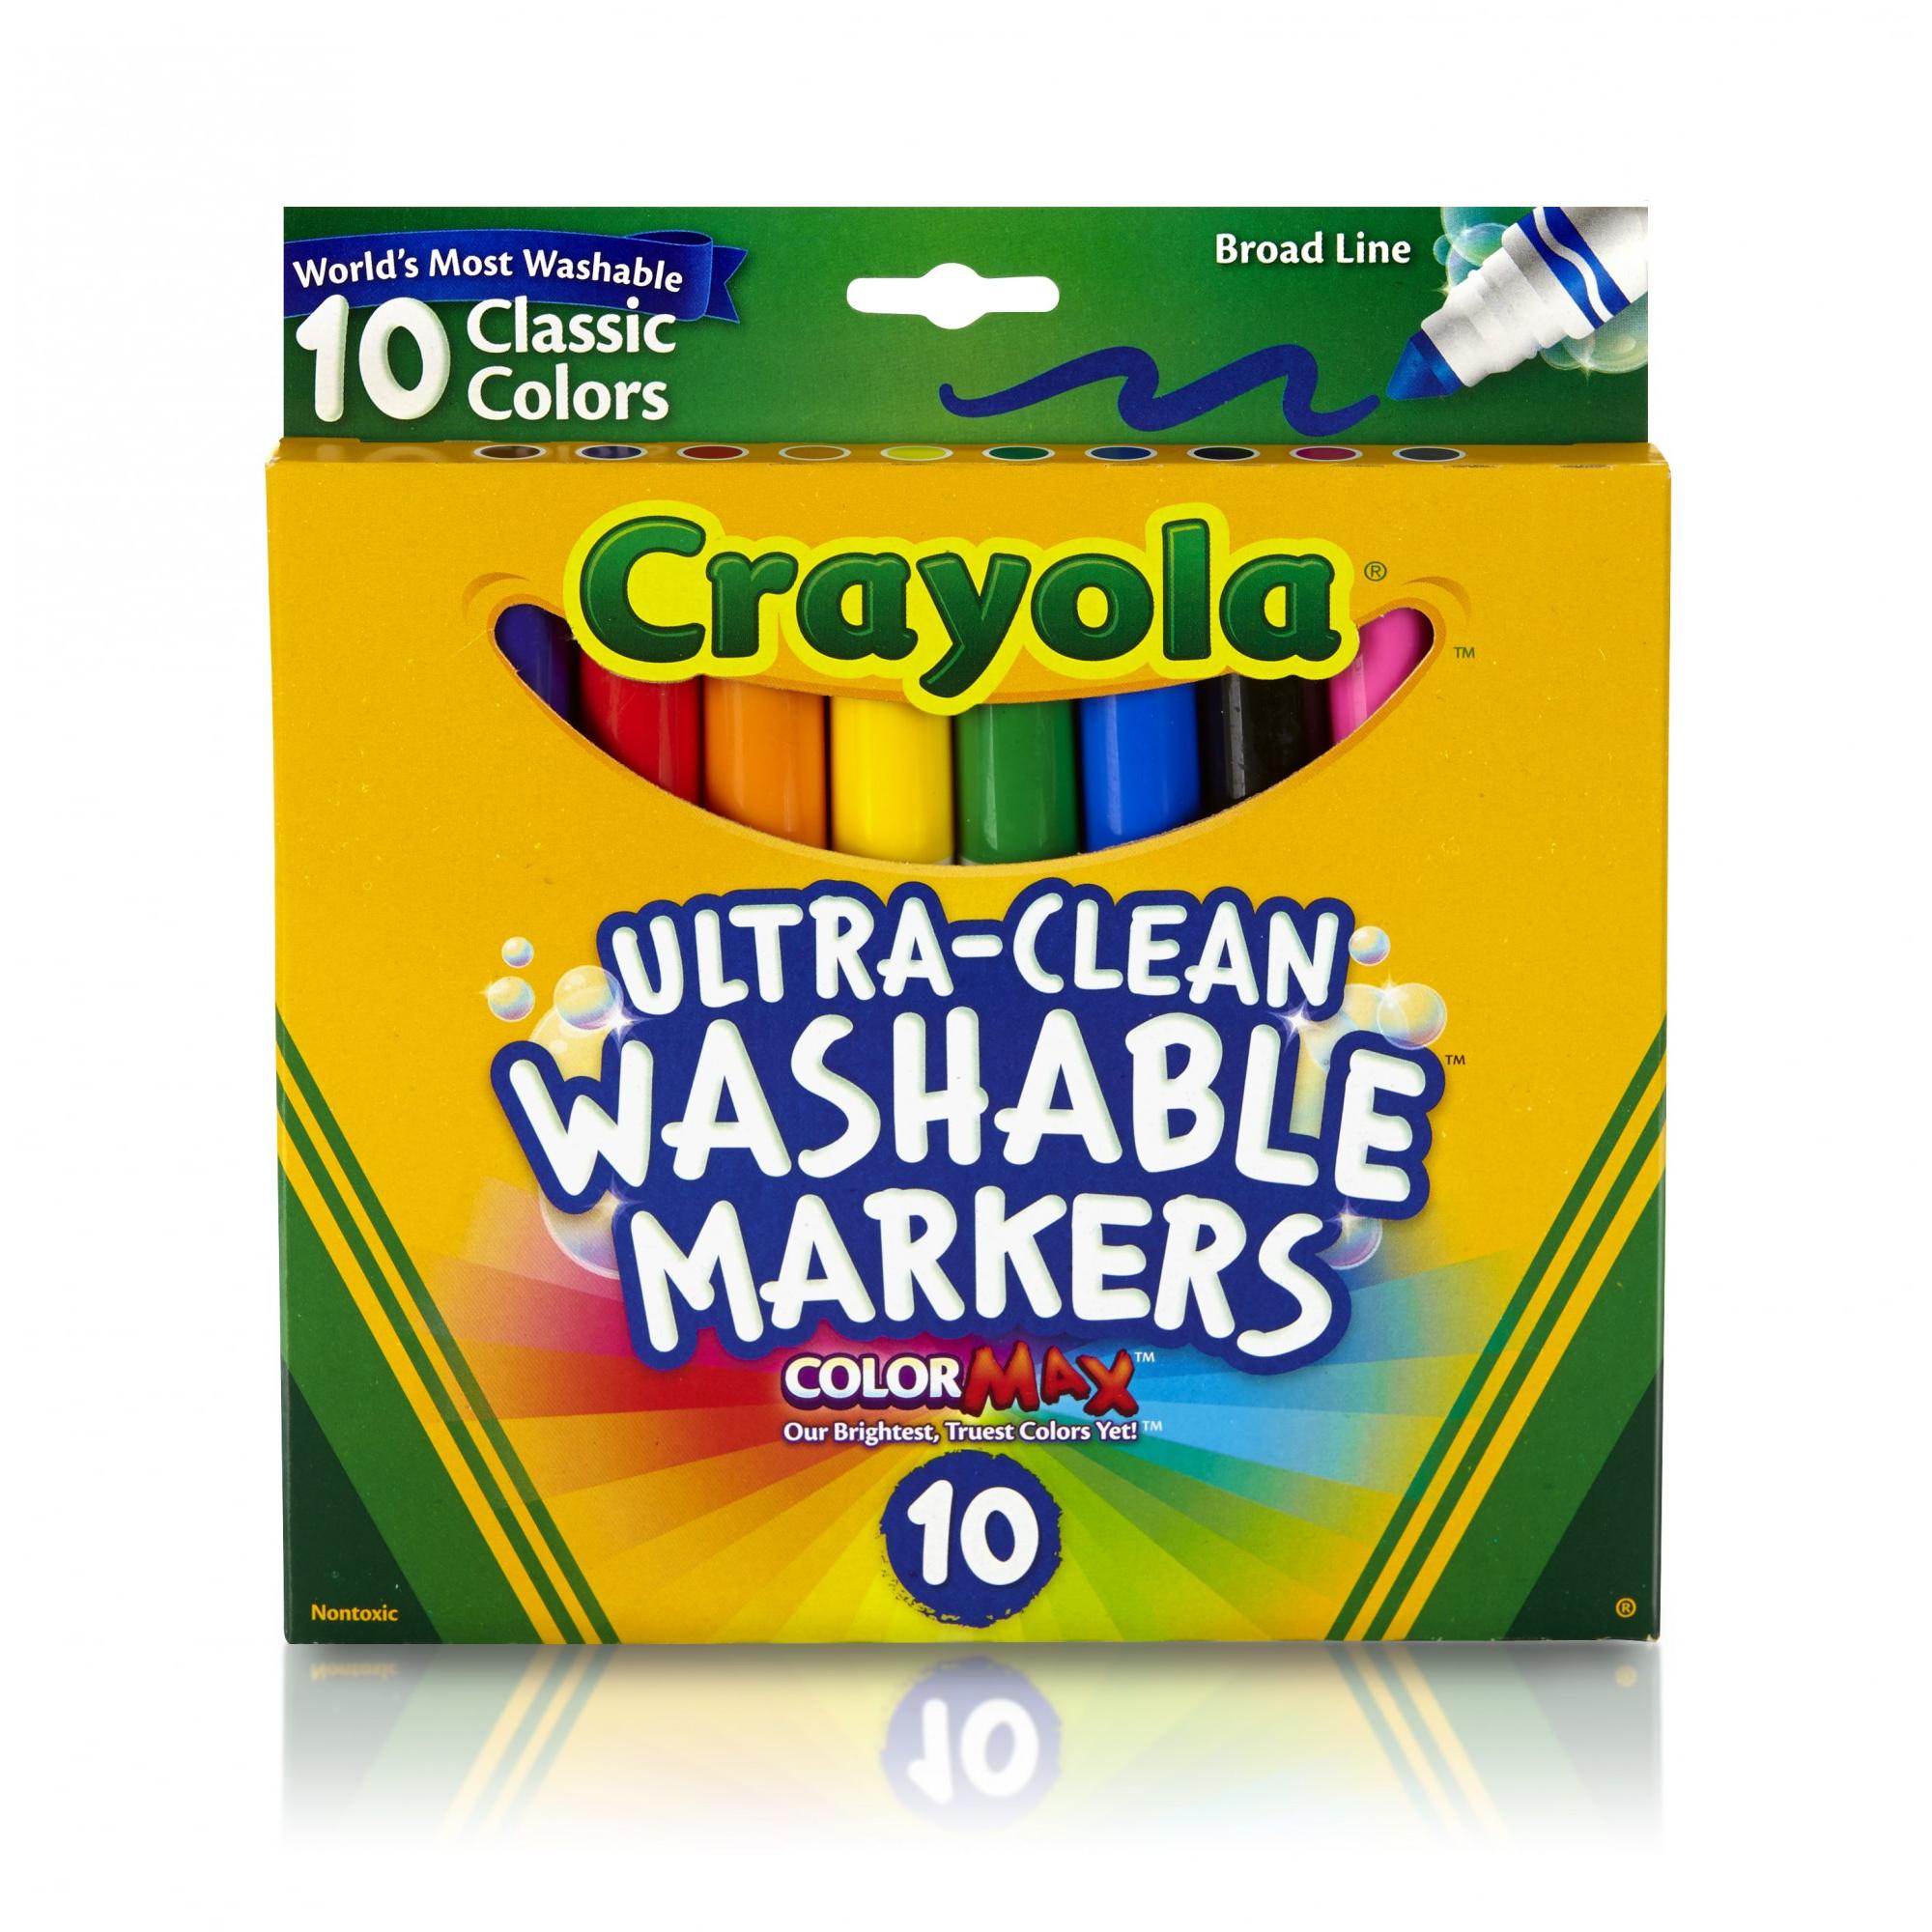 Crayola Ultra-Clean Washable Markers, Broad Tip, Assorted Classic Colors, Box of 10 thumbnail 